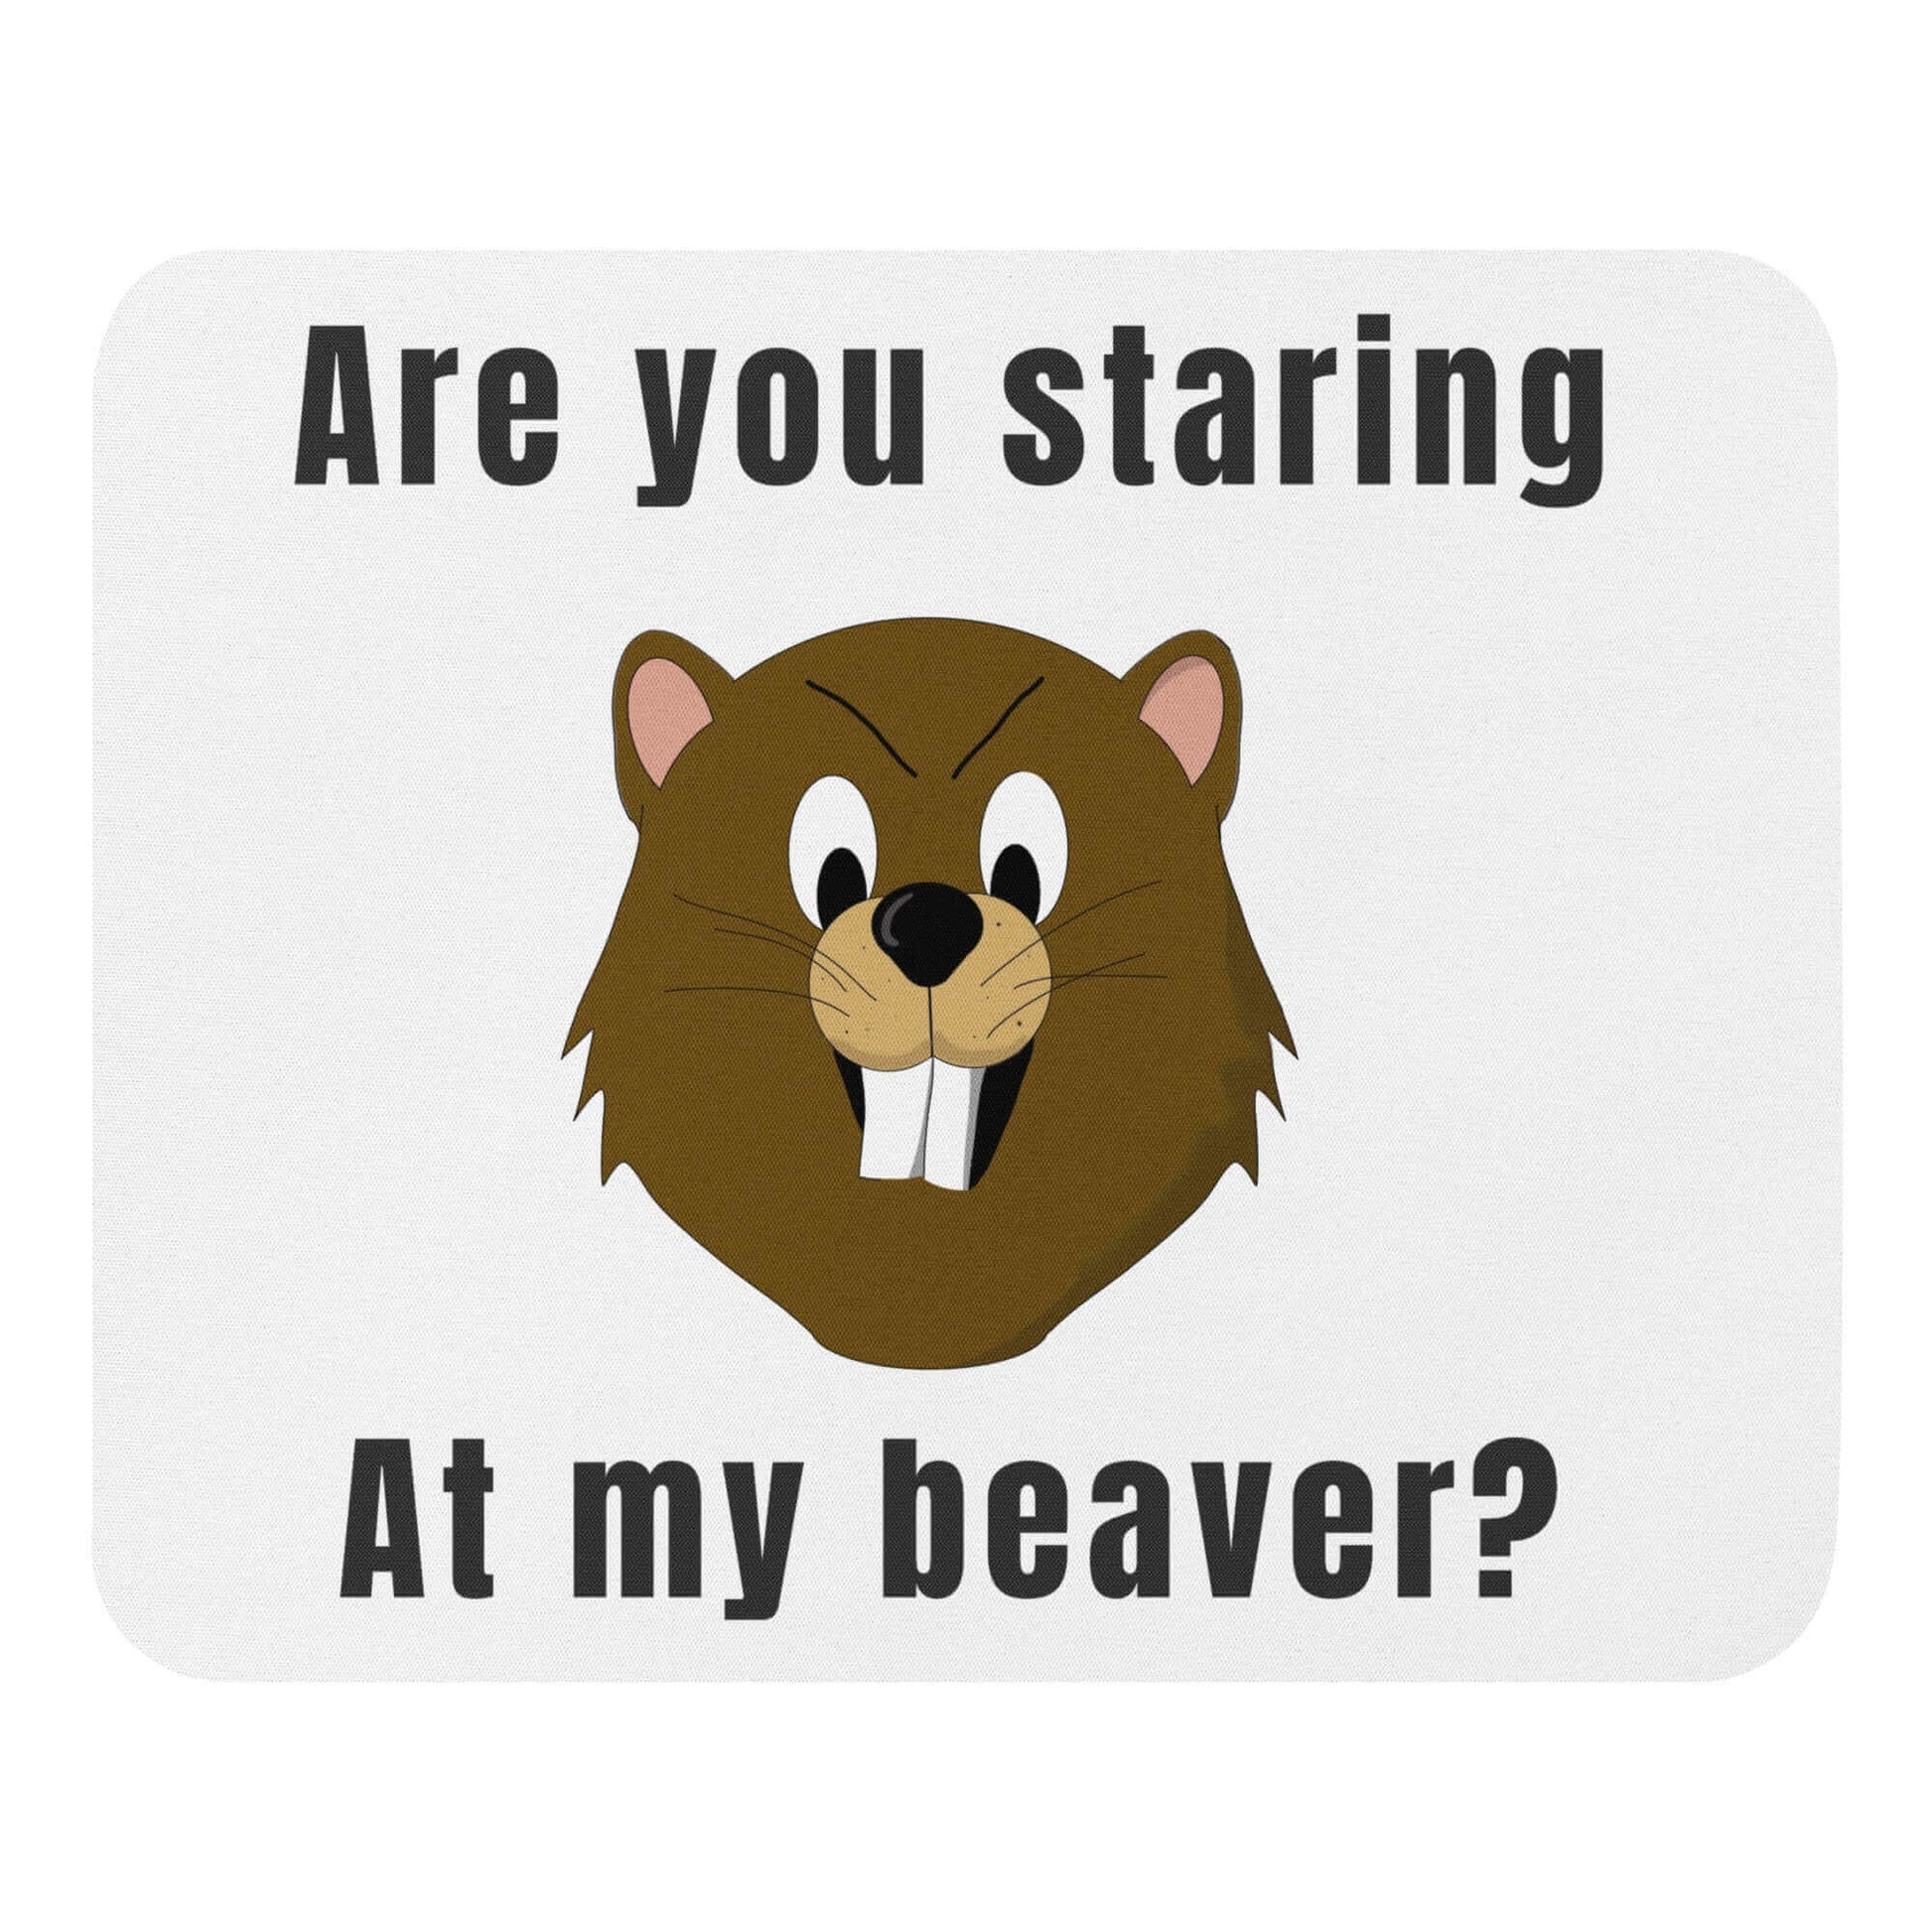 Are you staring at my beaver - Mouse pad bearded clam fathers day funny mouse pad gift for her gift for him gift for mom lady parts meat flaps pink taco pussy vagina